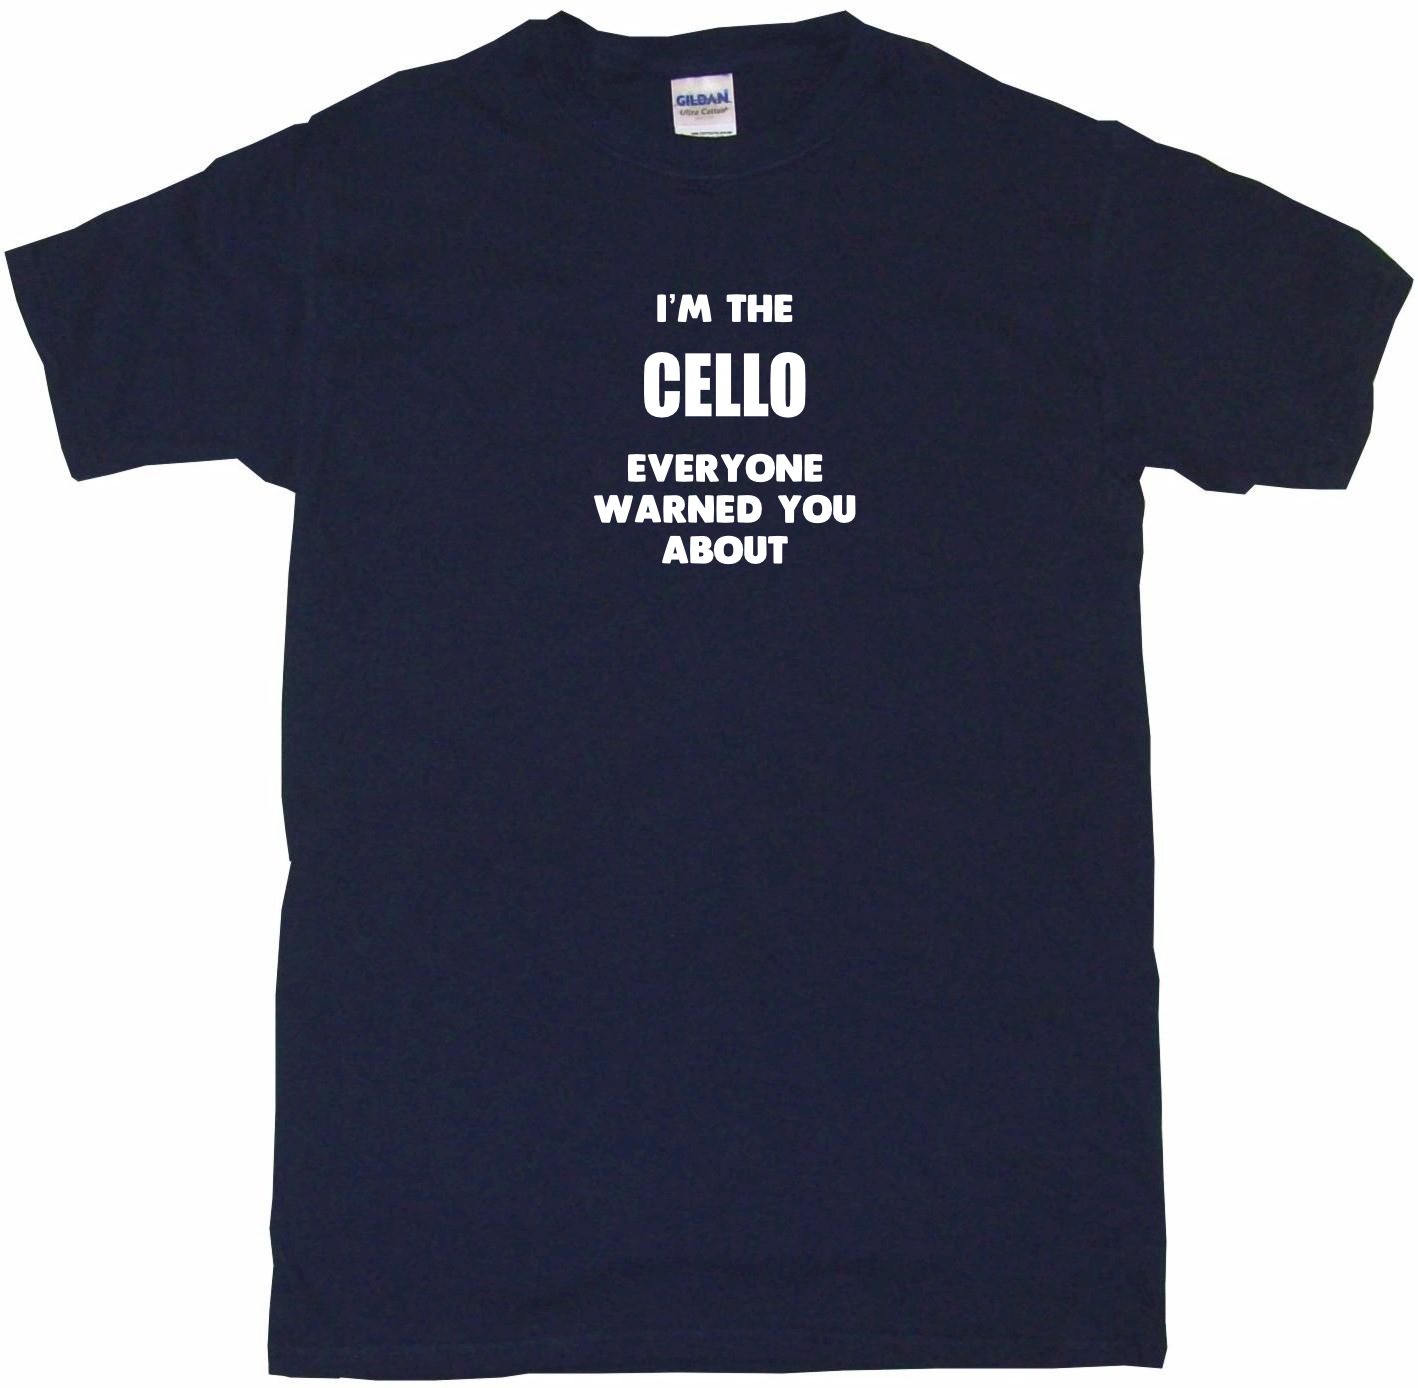 I'm The Cello Everyone Has Warned You About Kids Tee Shirt 2T-XL 